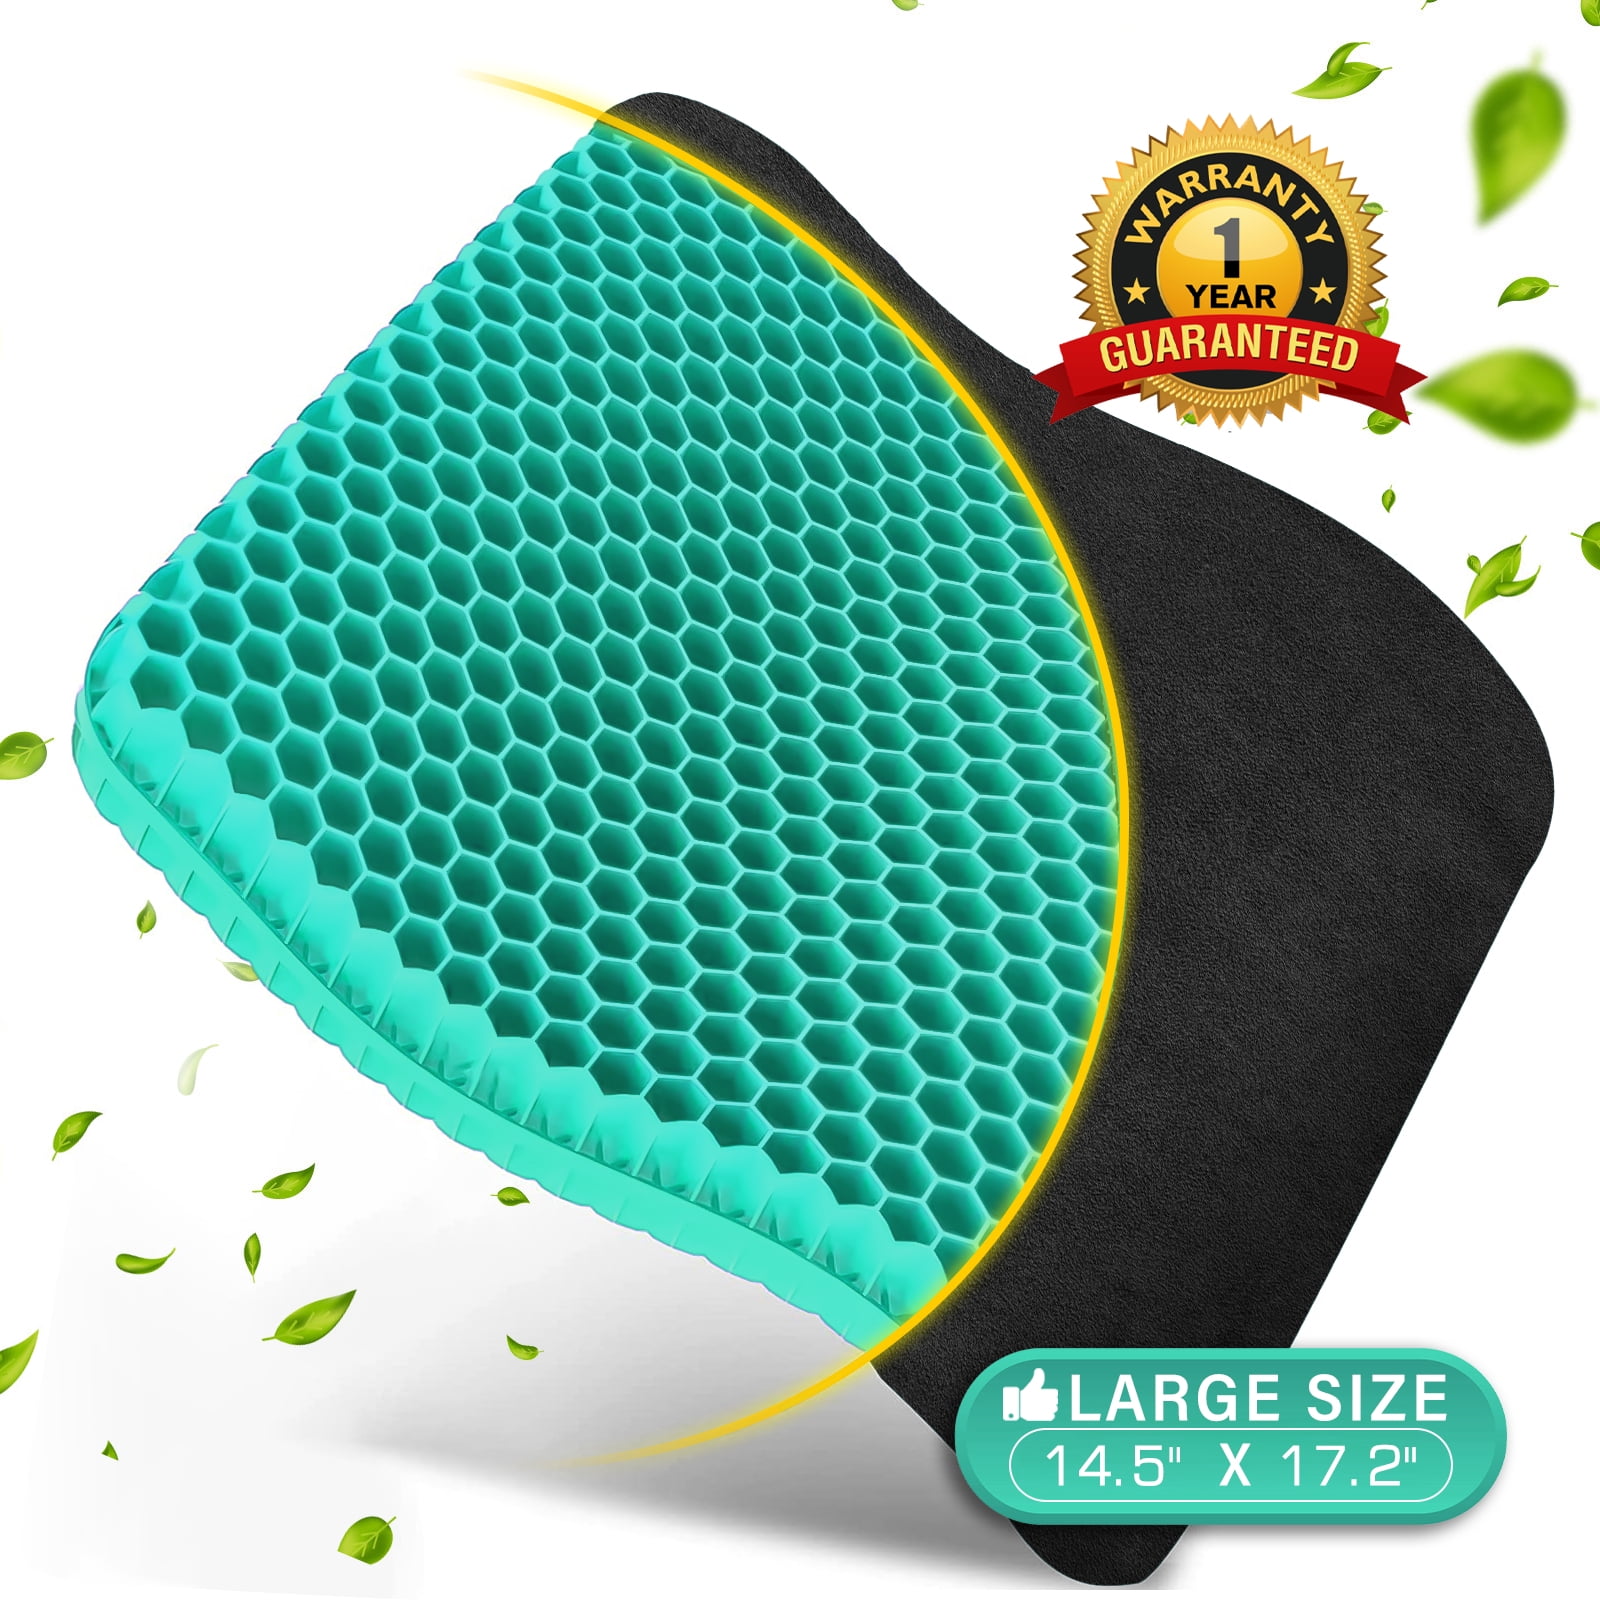 Super Large & Thick Gel Seat Cushion Up to 330lbs, Office Chair Cushion for Long Sitting, Breathable Egg Chair Pads Butt Pillow, Pain Relief Car Seat